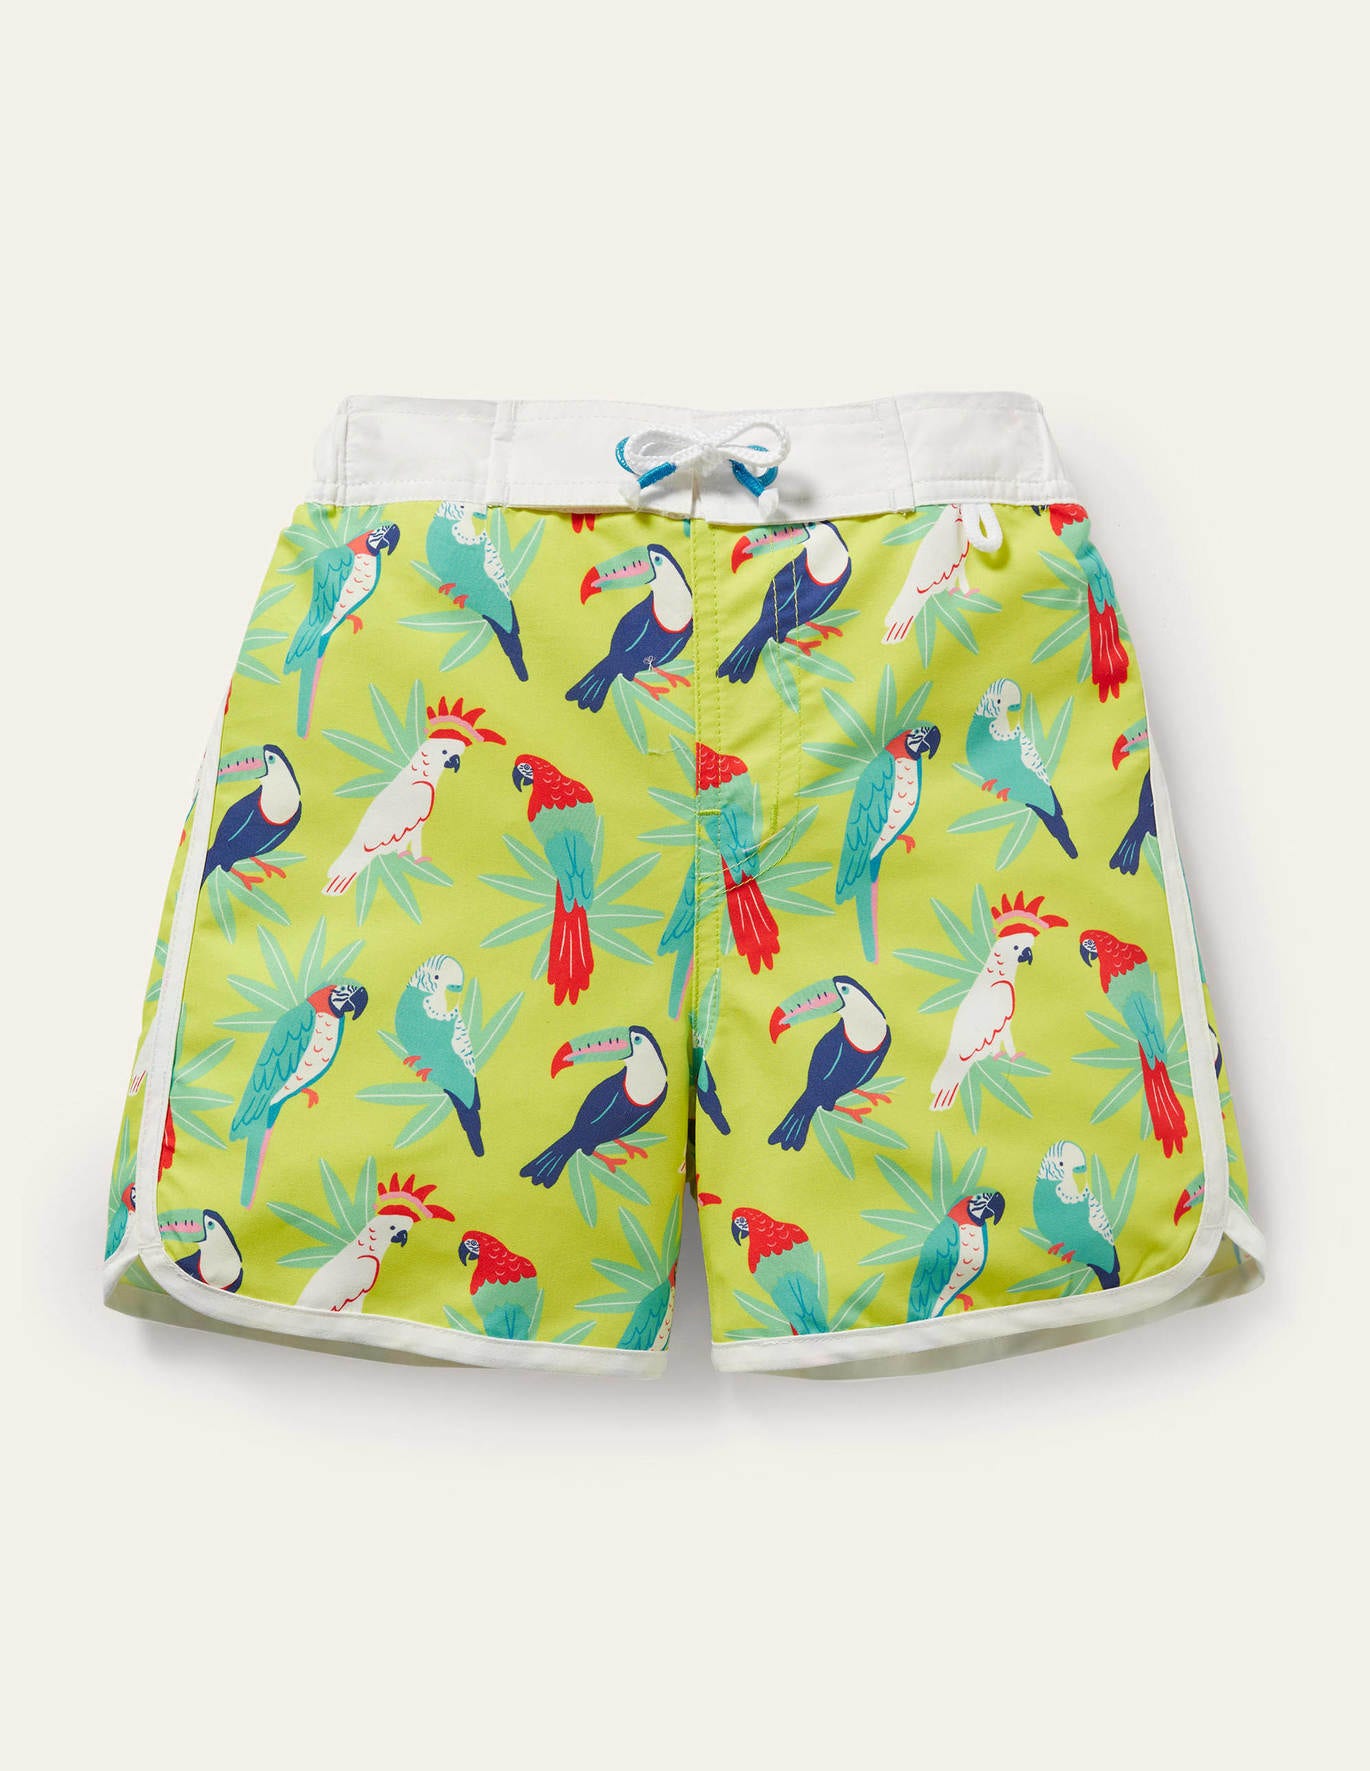 Boden Surf Shorts - Yellow Tropical Toucans